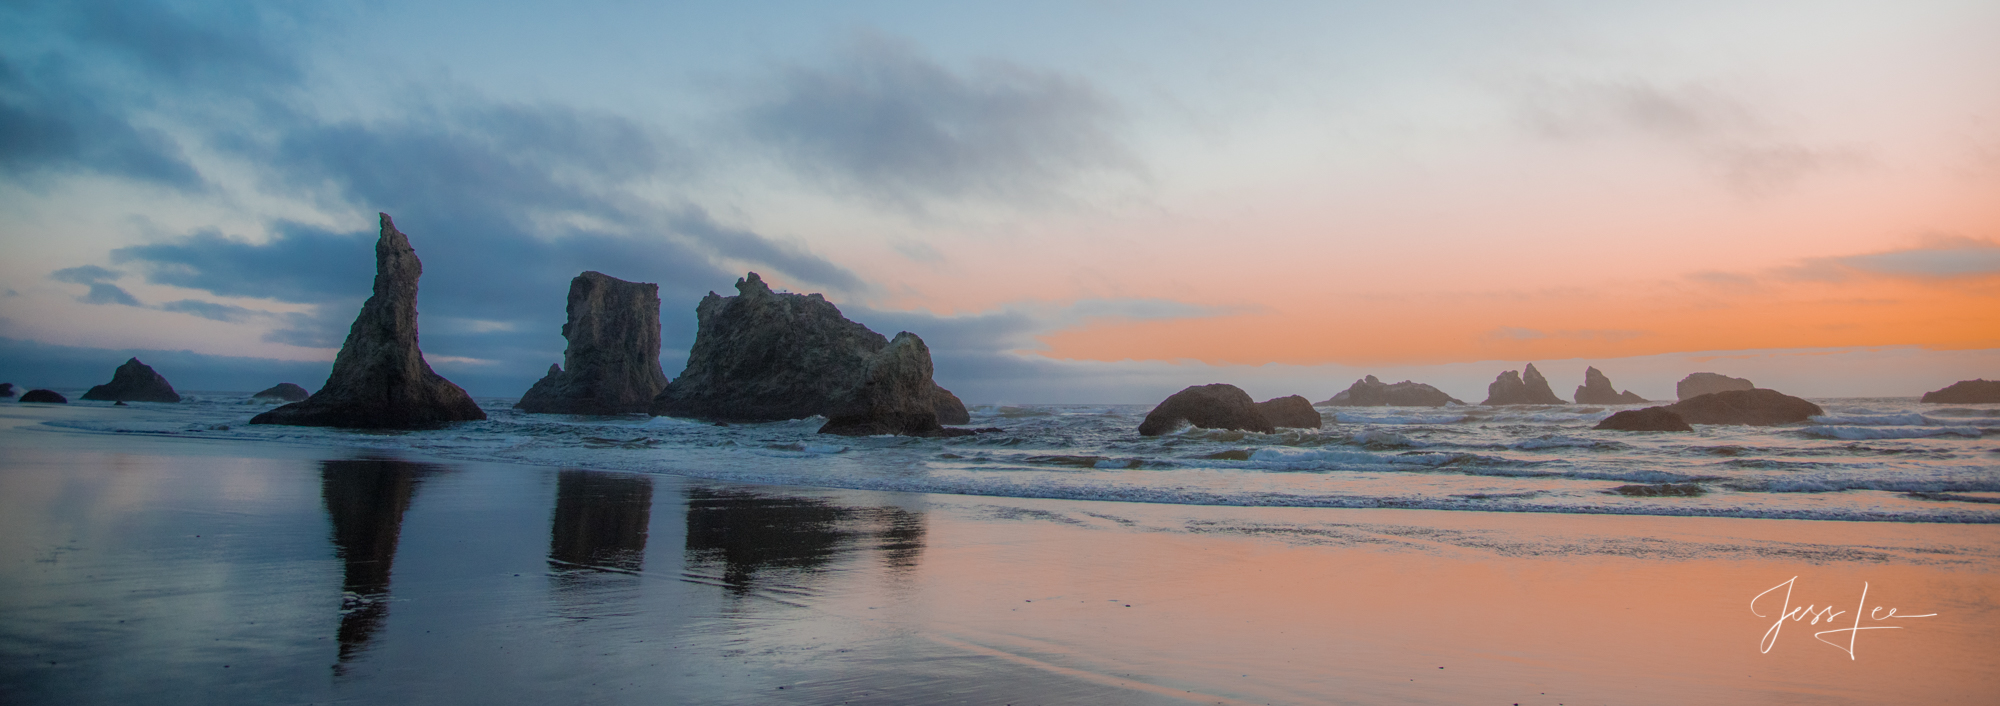 Fine Art Limited Edition Photography of Seastacks in Oregon. Oregon Landscapes.This is part of the luxurious collection of fine...